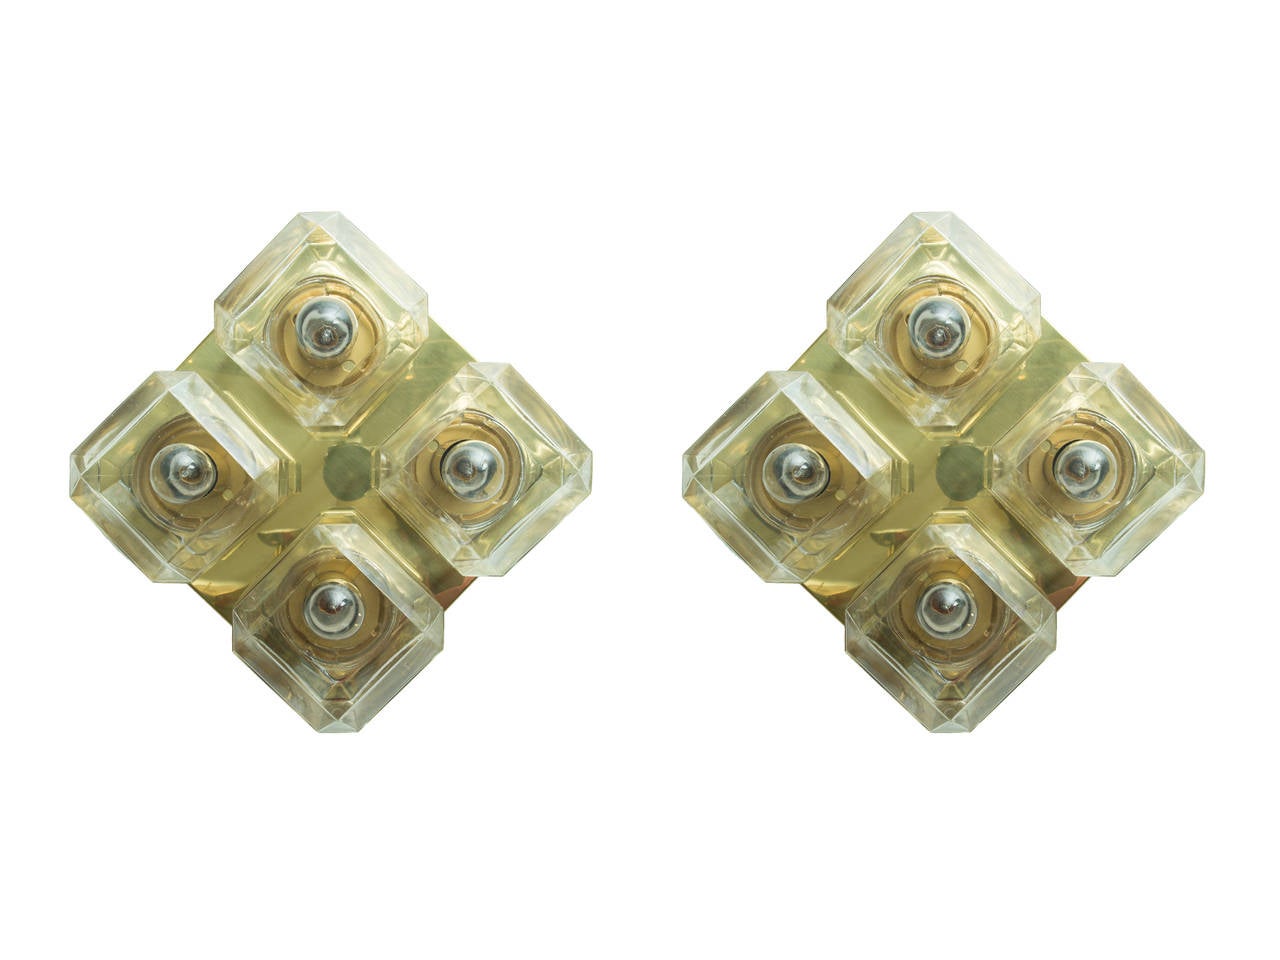 A pair of 4 globe glass and brass mod wall or celling mount light fixtures.